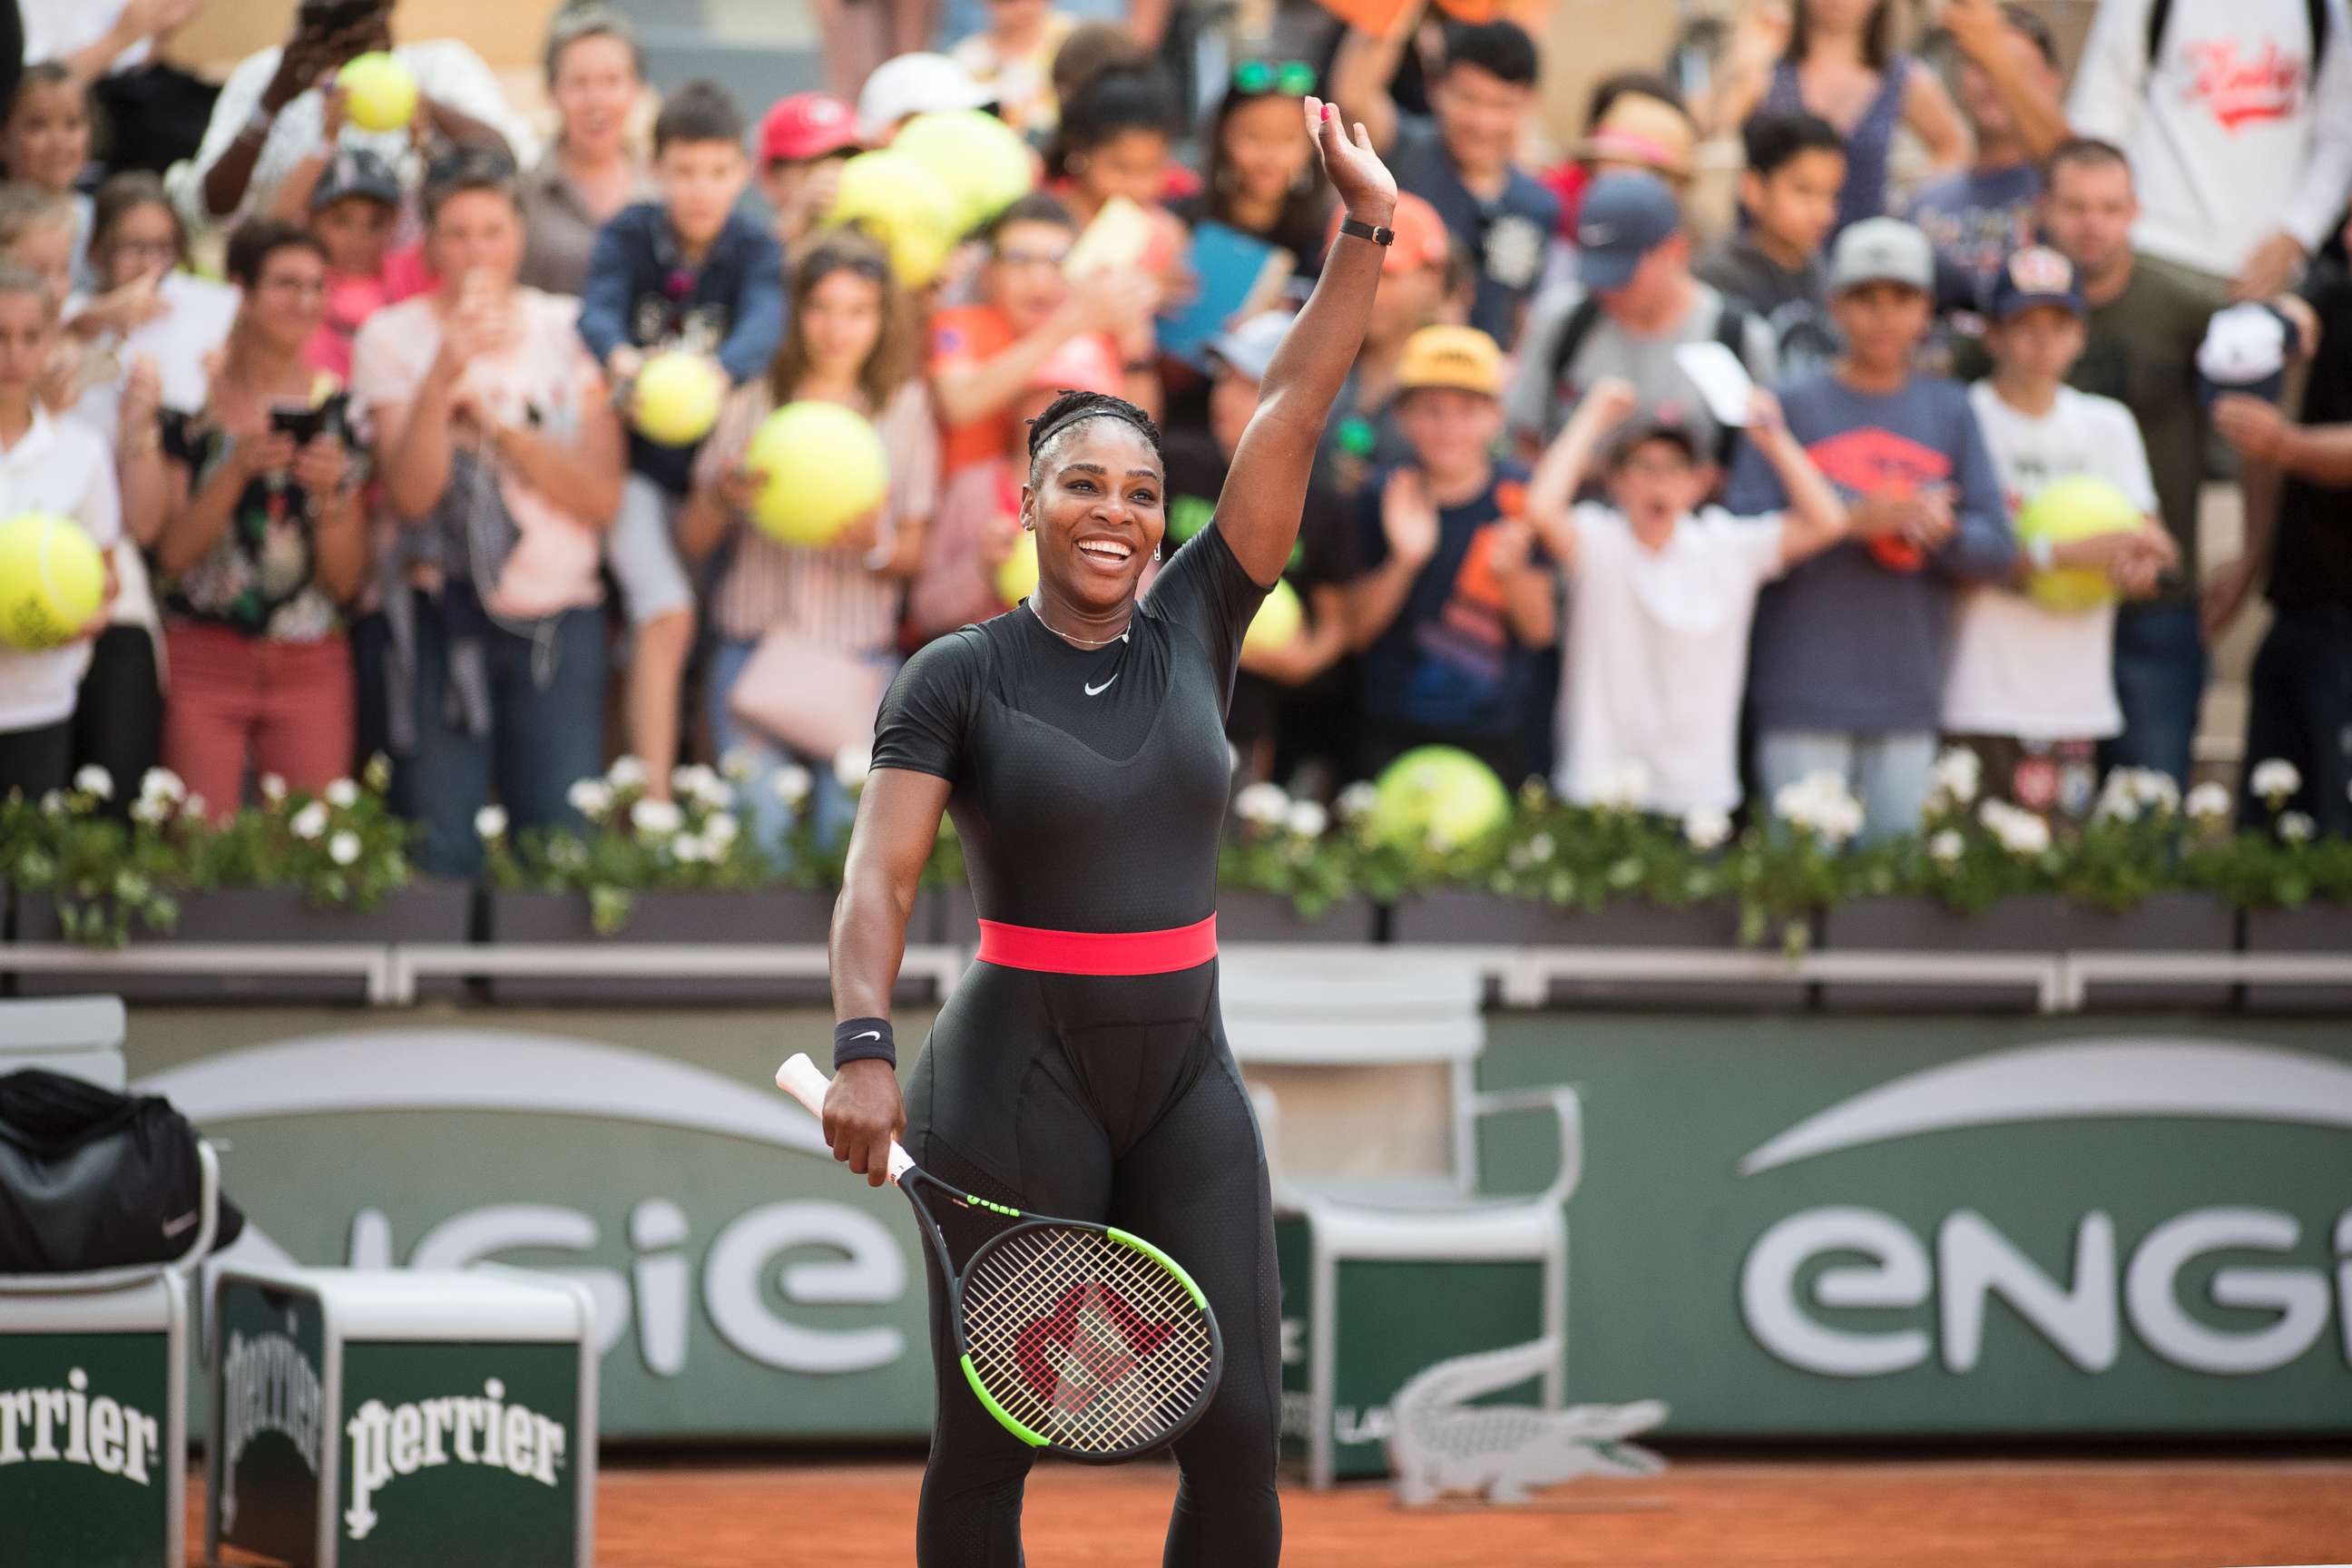 PHOTO: Serena Williams of the United States celebrates her win against Julia Goerges of Germany on Court Suzanne Lenglen in the Women's Singles Competition at the 2018 French Open Tennis Tournament, June 2, 2018, in Paris.